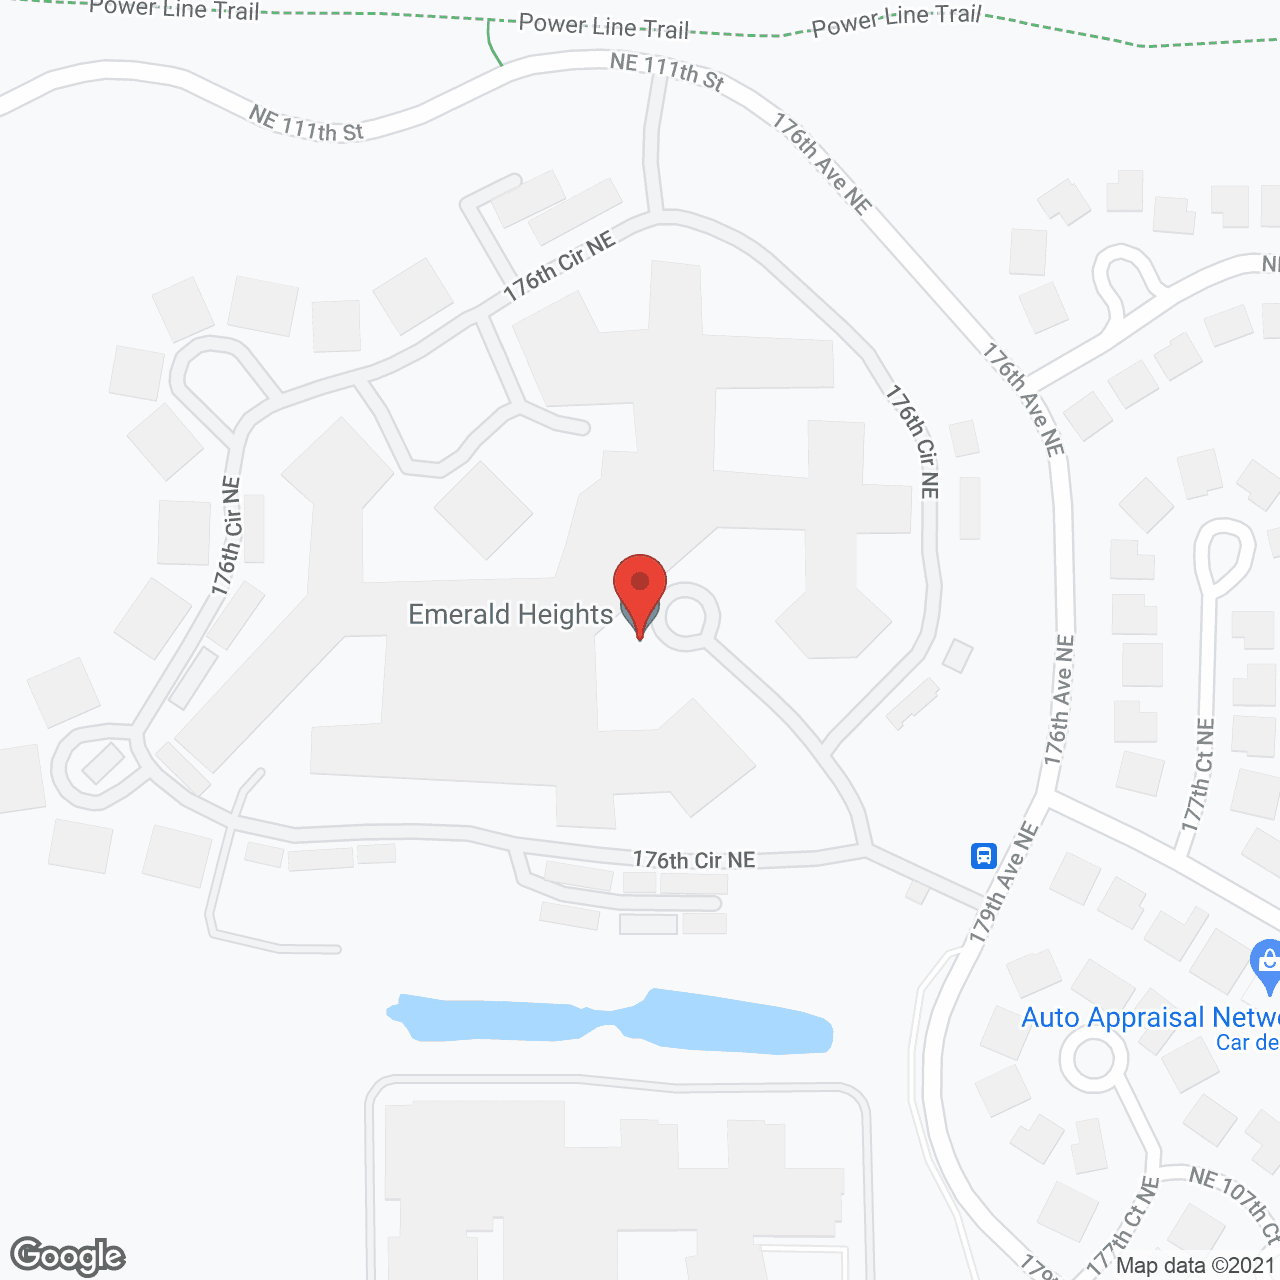 Emerald Heights in google map